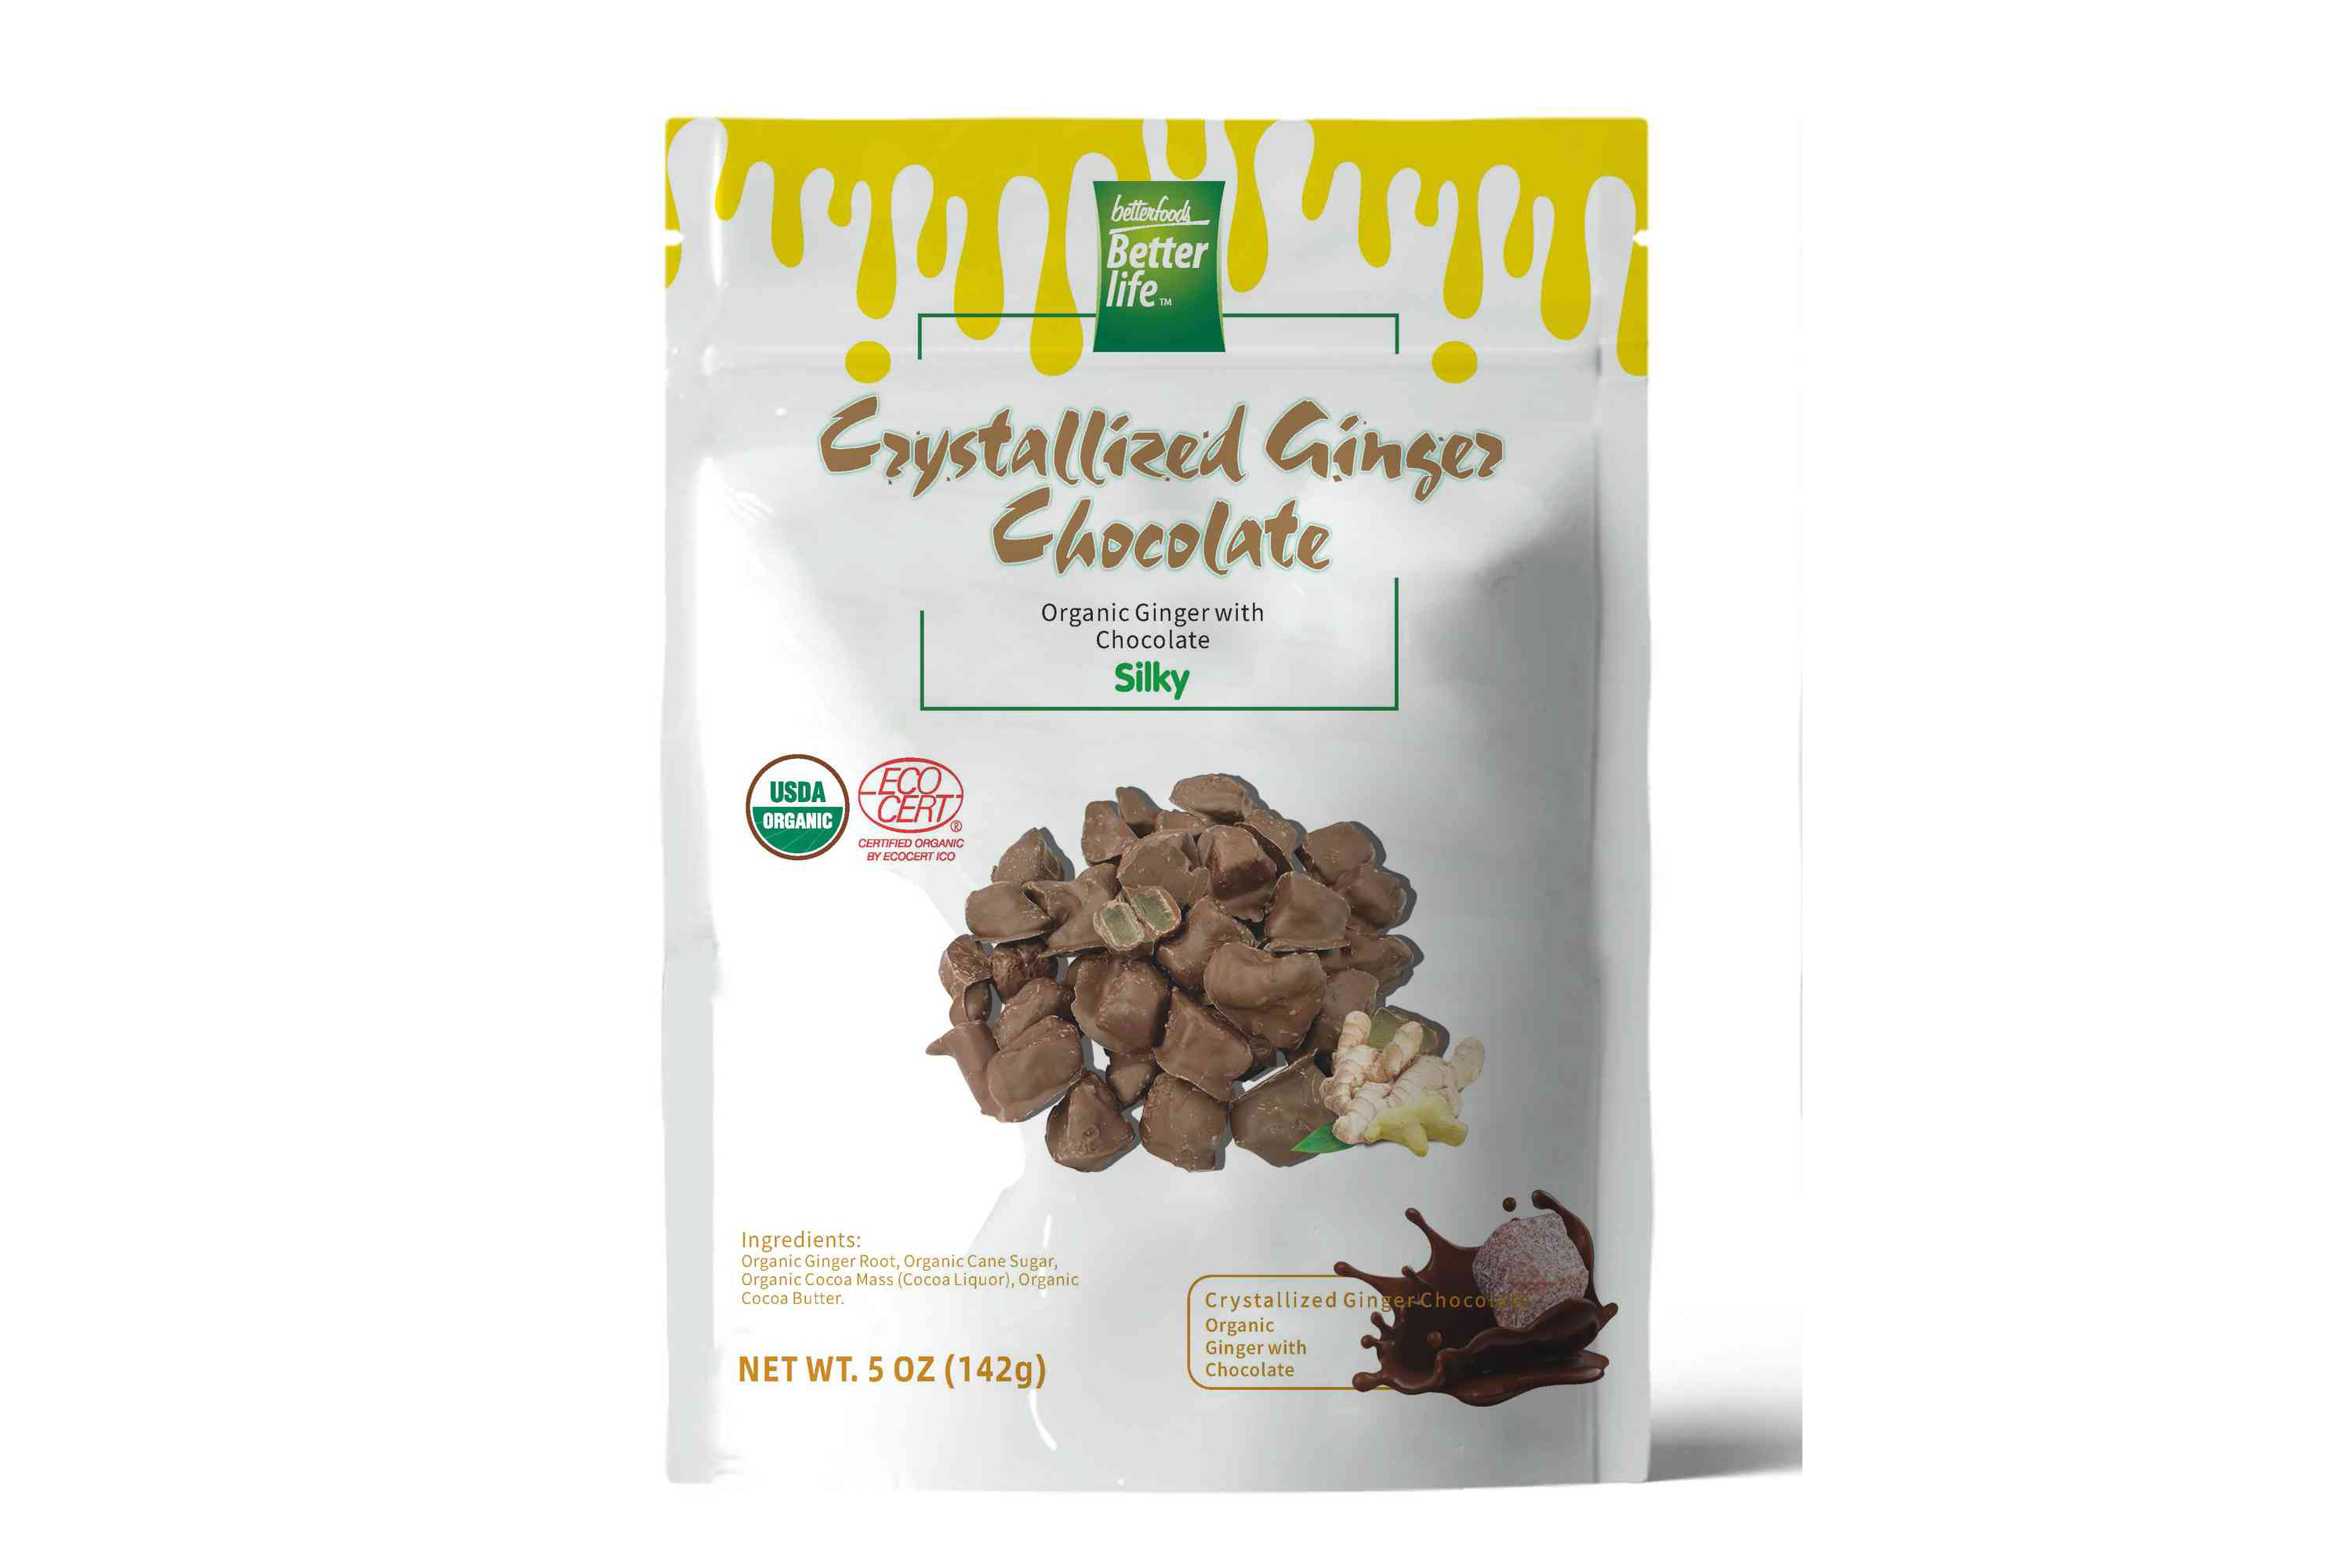 Crystallized Ginger Chocolate